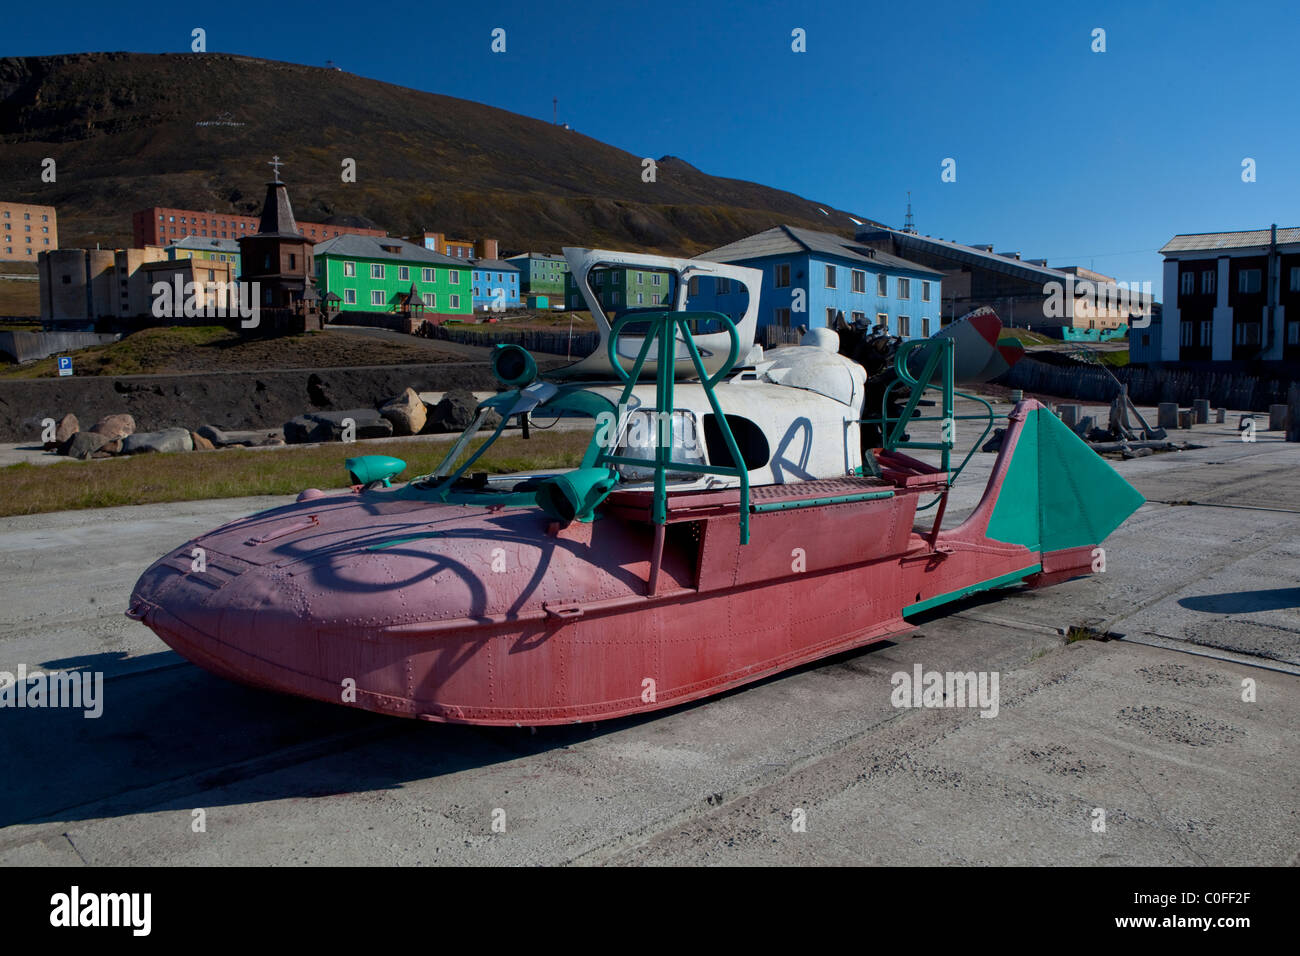 Home-made space car in Barentsburg, a Russian coal mining town in the Norwegian Archipelego of Svalbard. Stock Photo